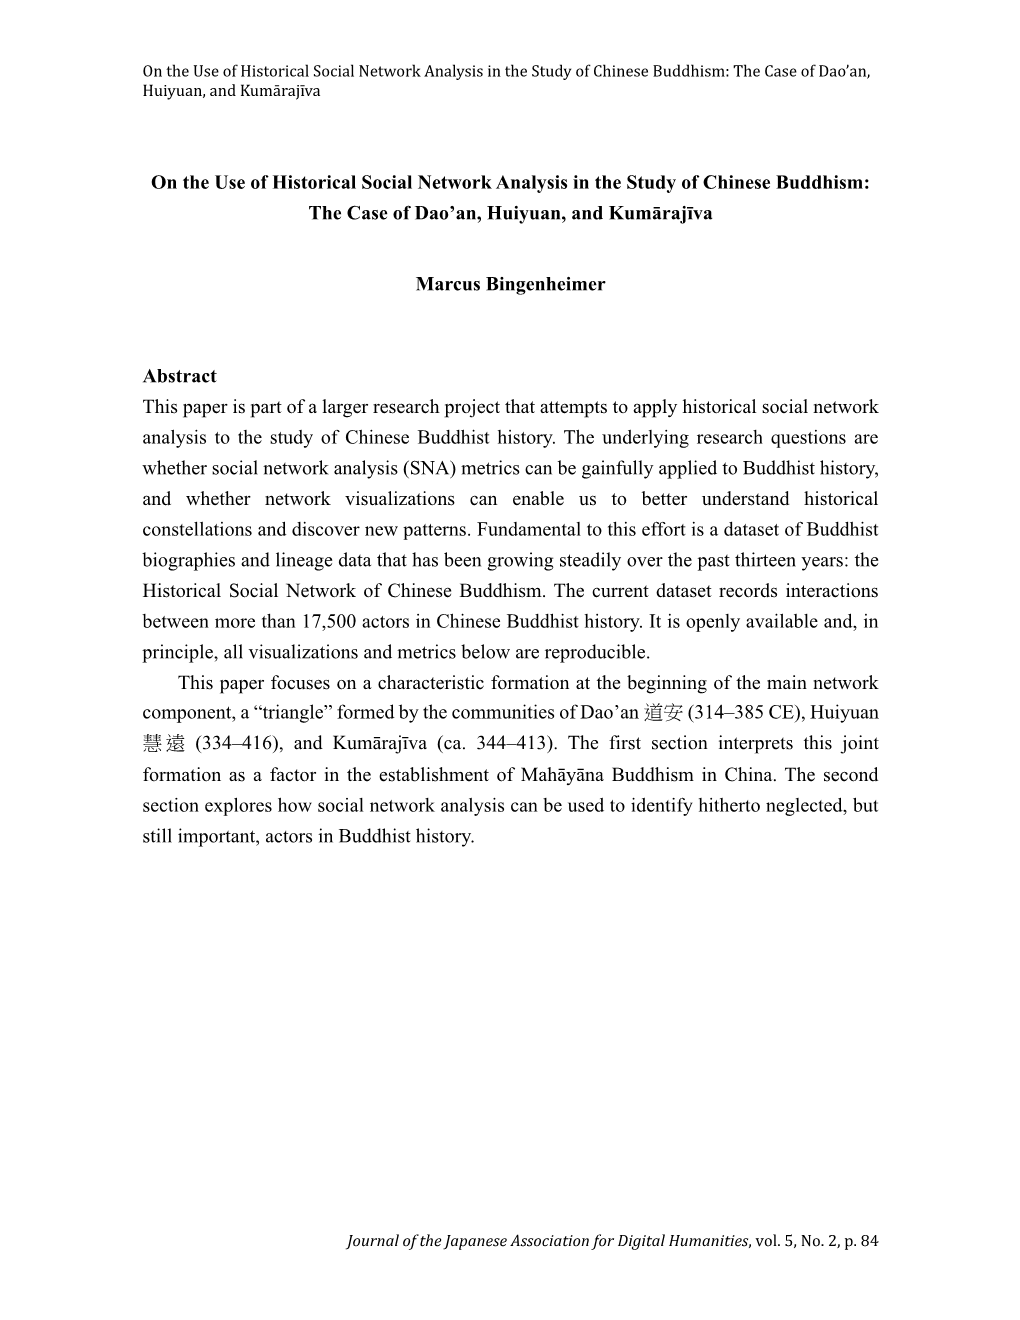 On the Use of Historical Social Network Analysis in the Study of Chinese Buddhism: the Case of Dao’An, Huiyuan, and Kuma Rajīva